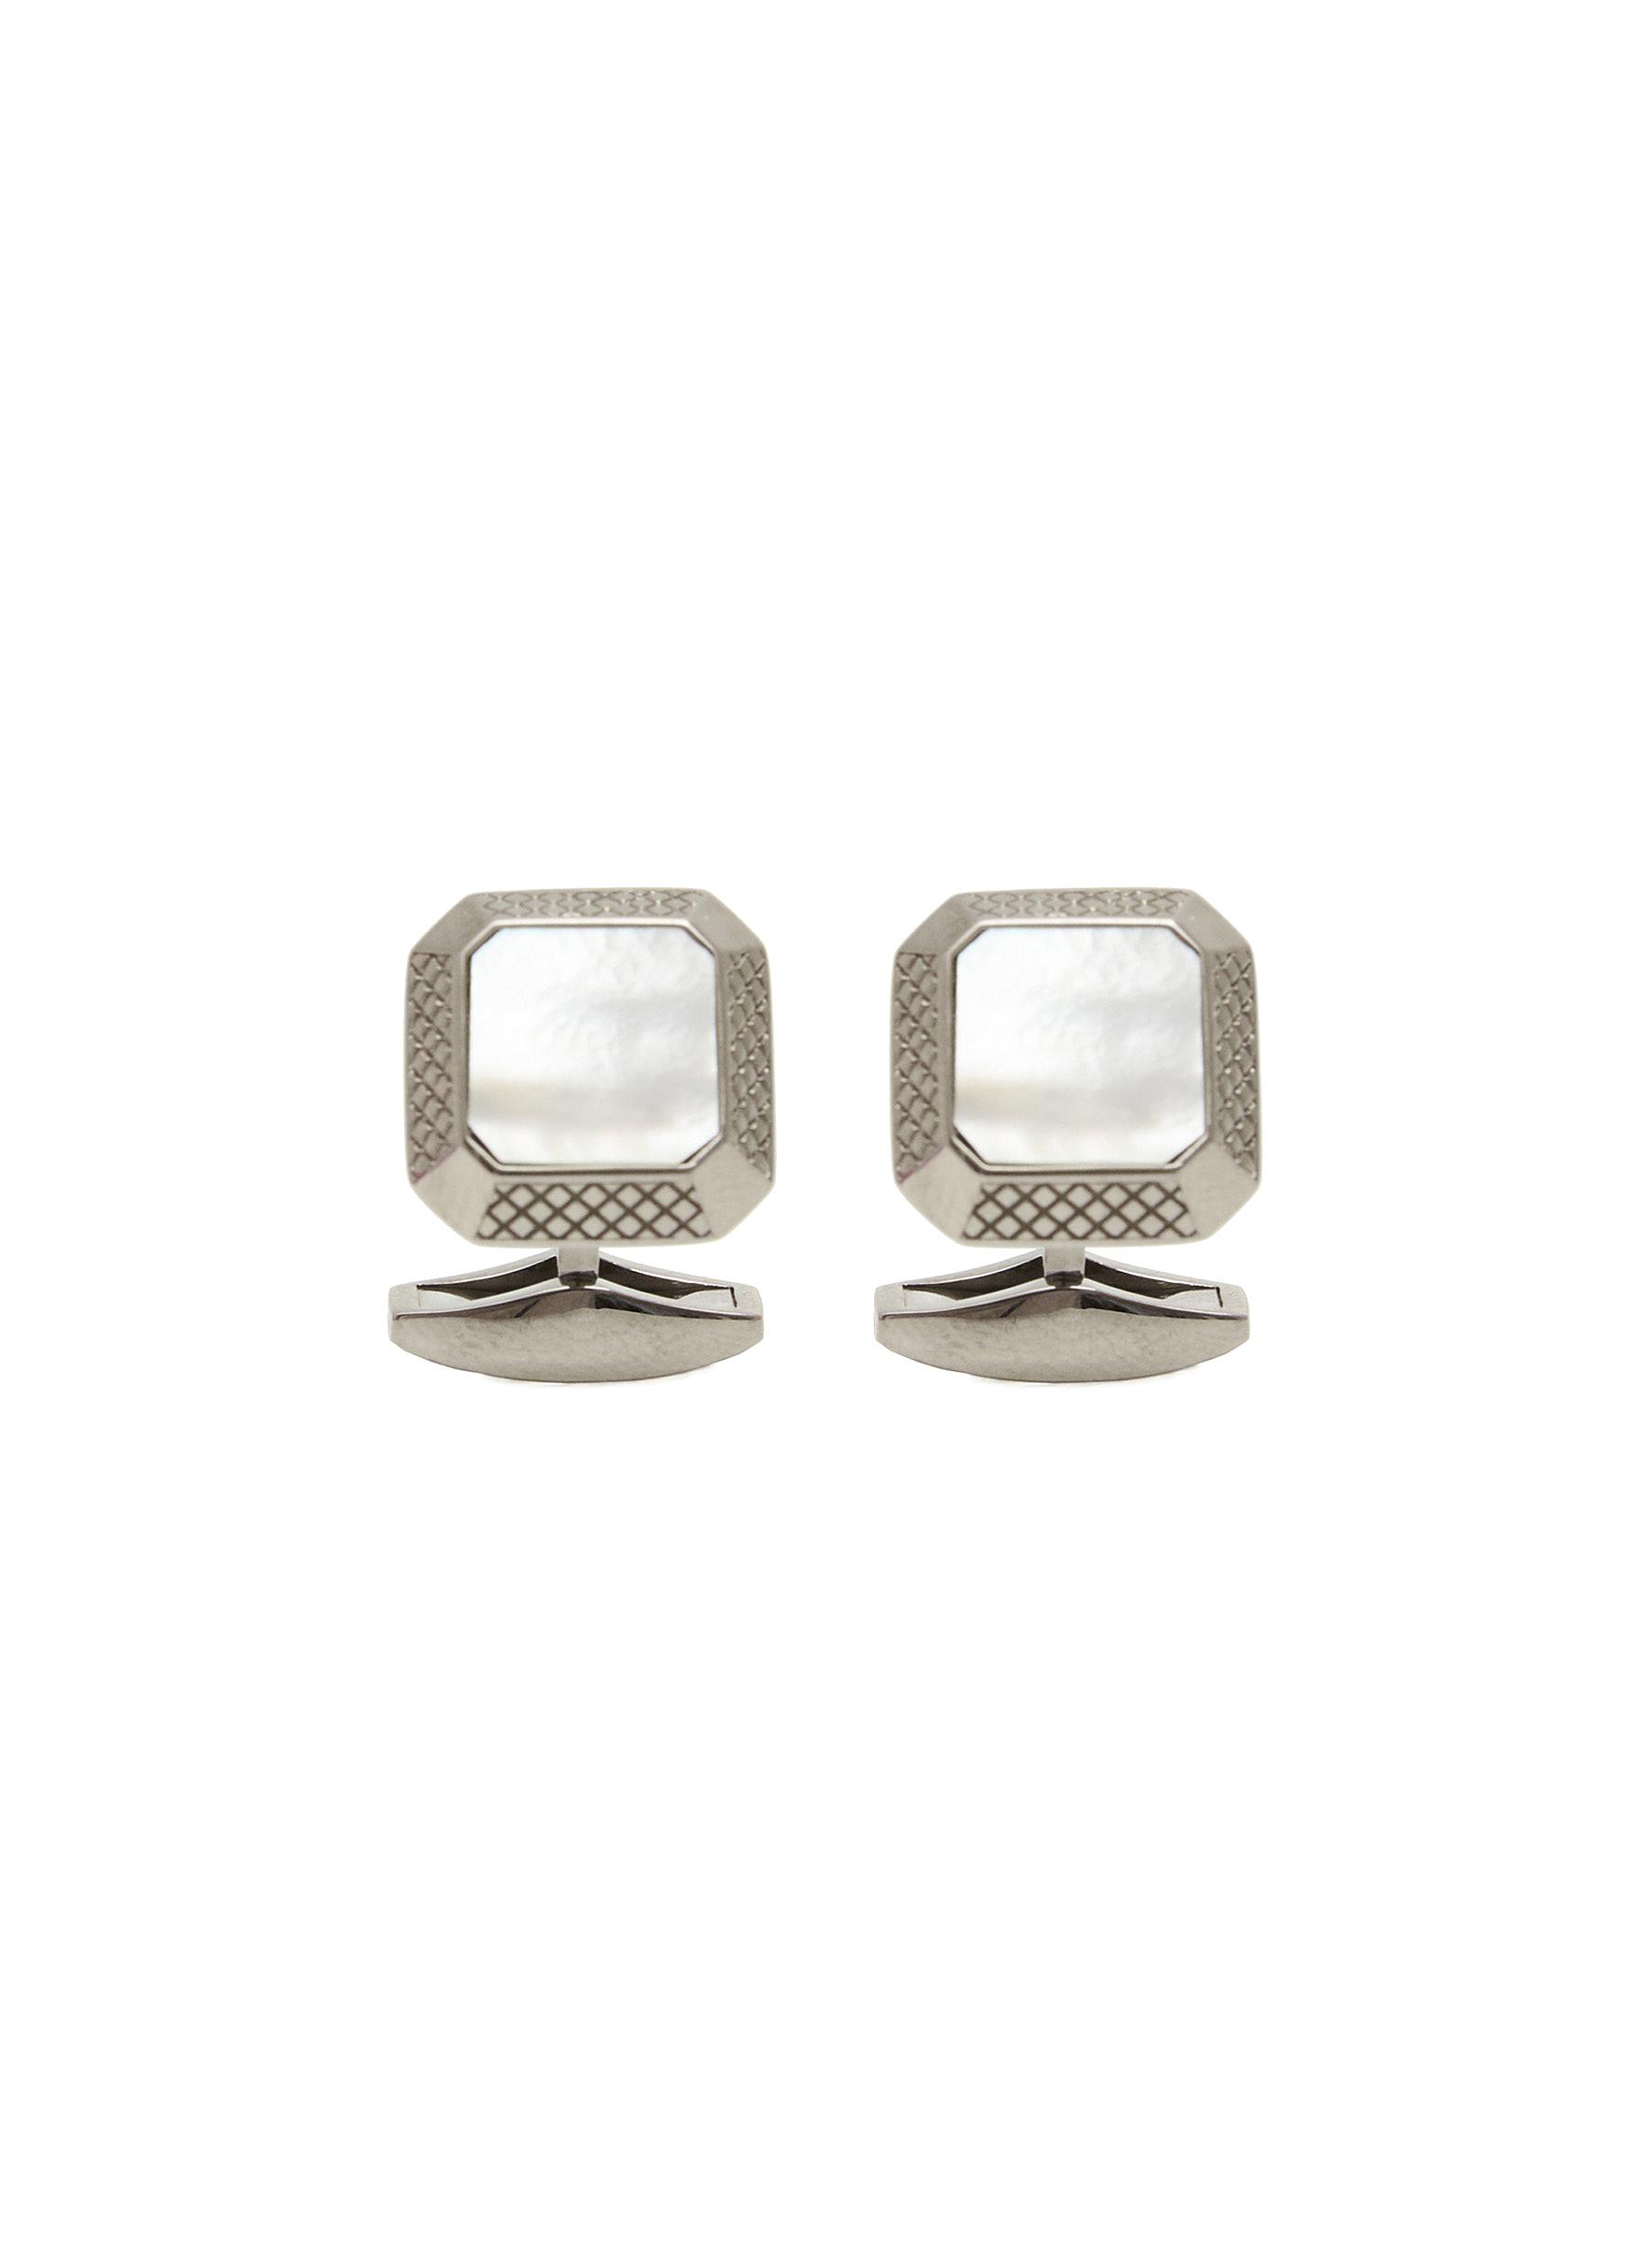 Rhodium Plated Sterling Silver Mother of Pearl Cufflinks